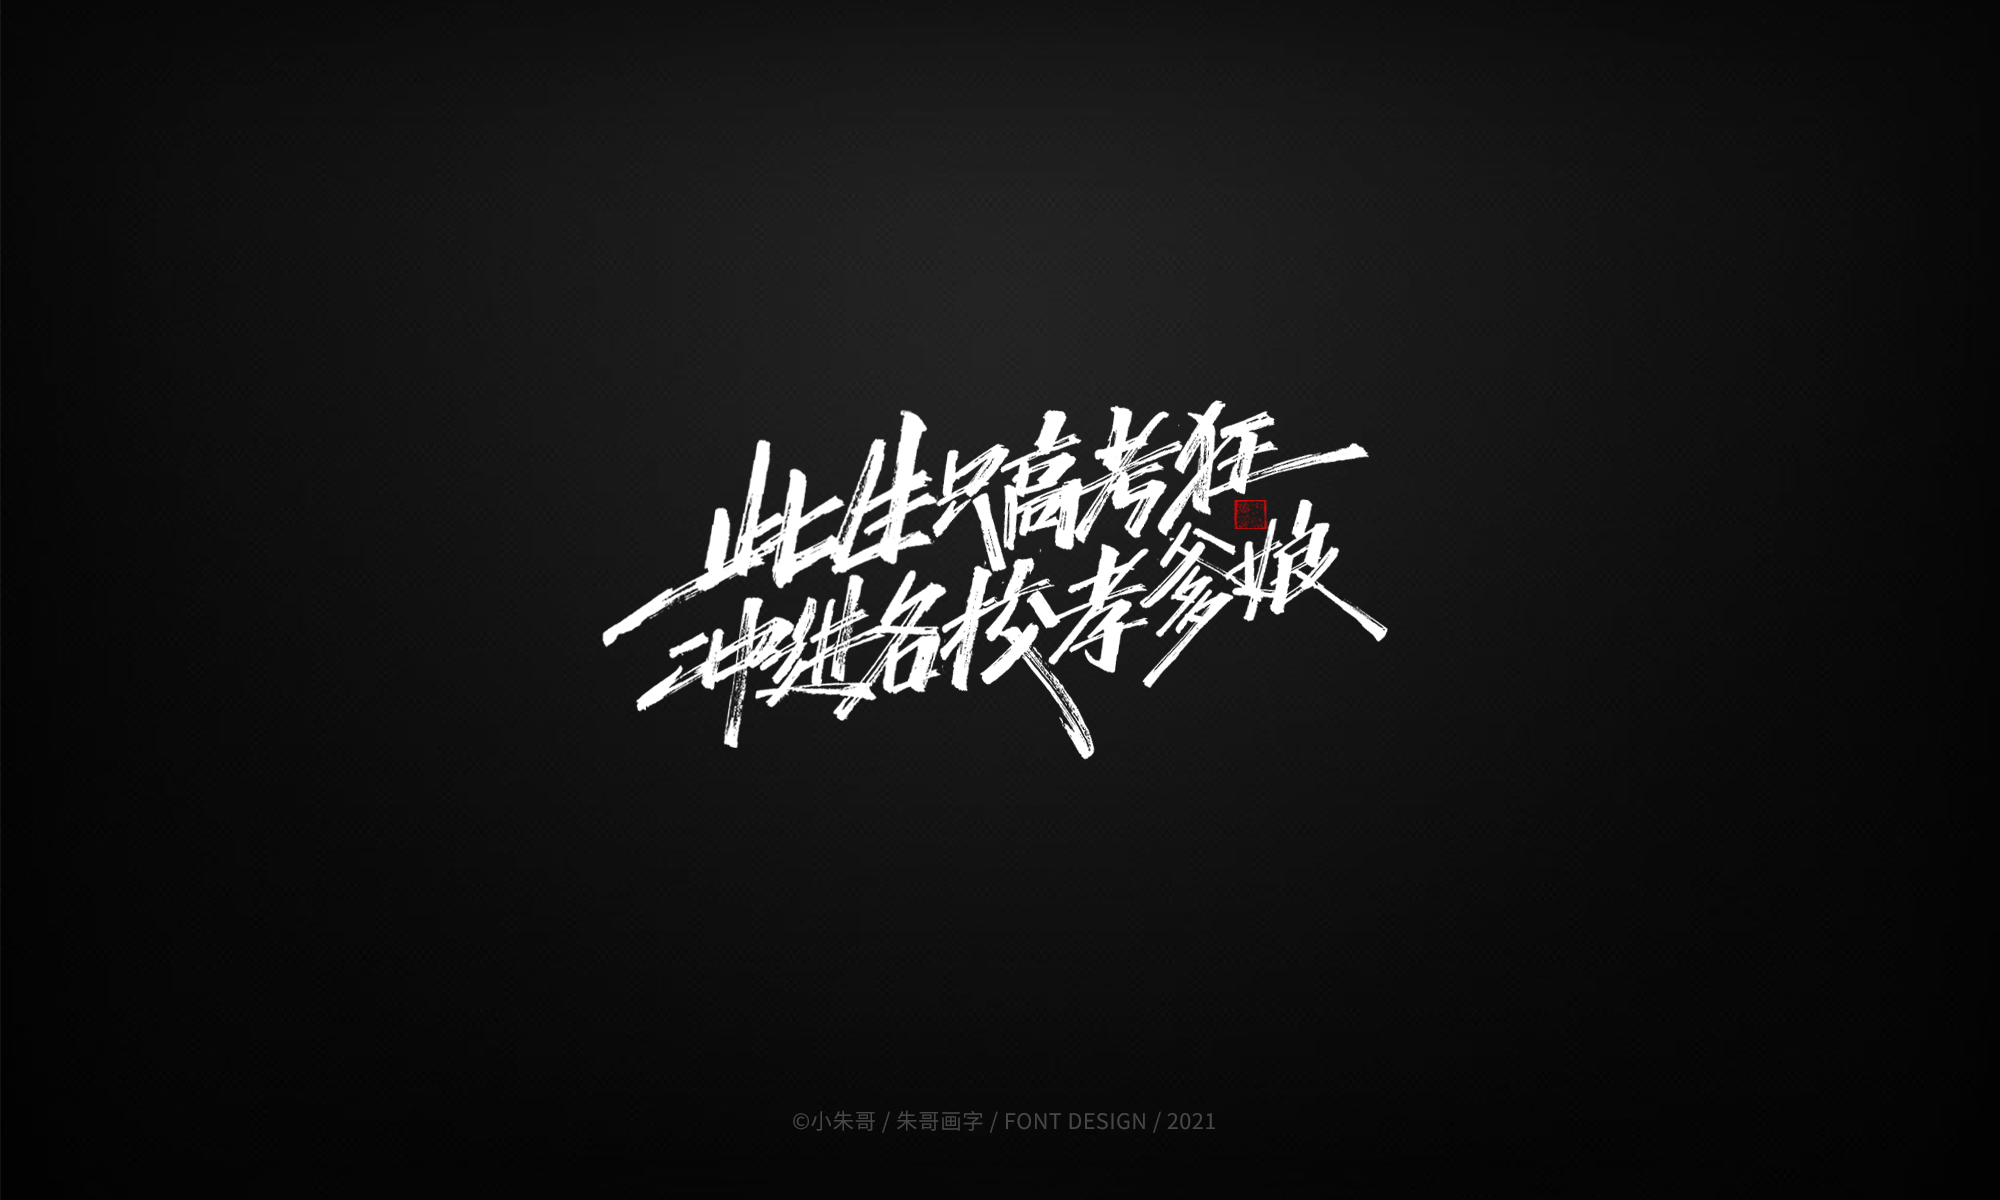 16P Collection of the latest Chinese font design schemes in 2021 #.127